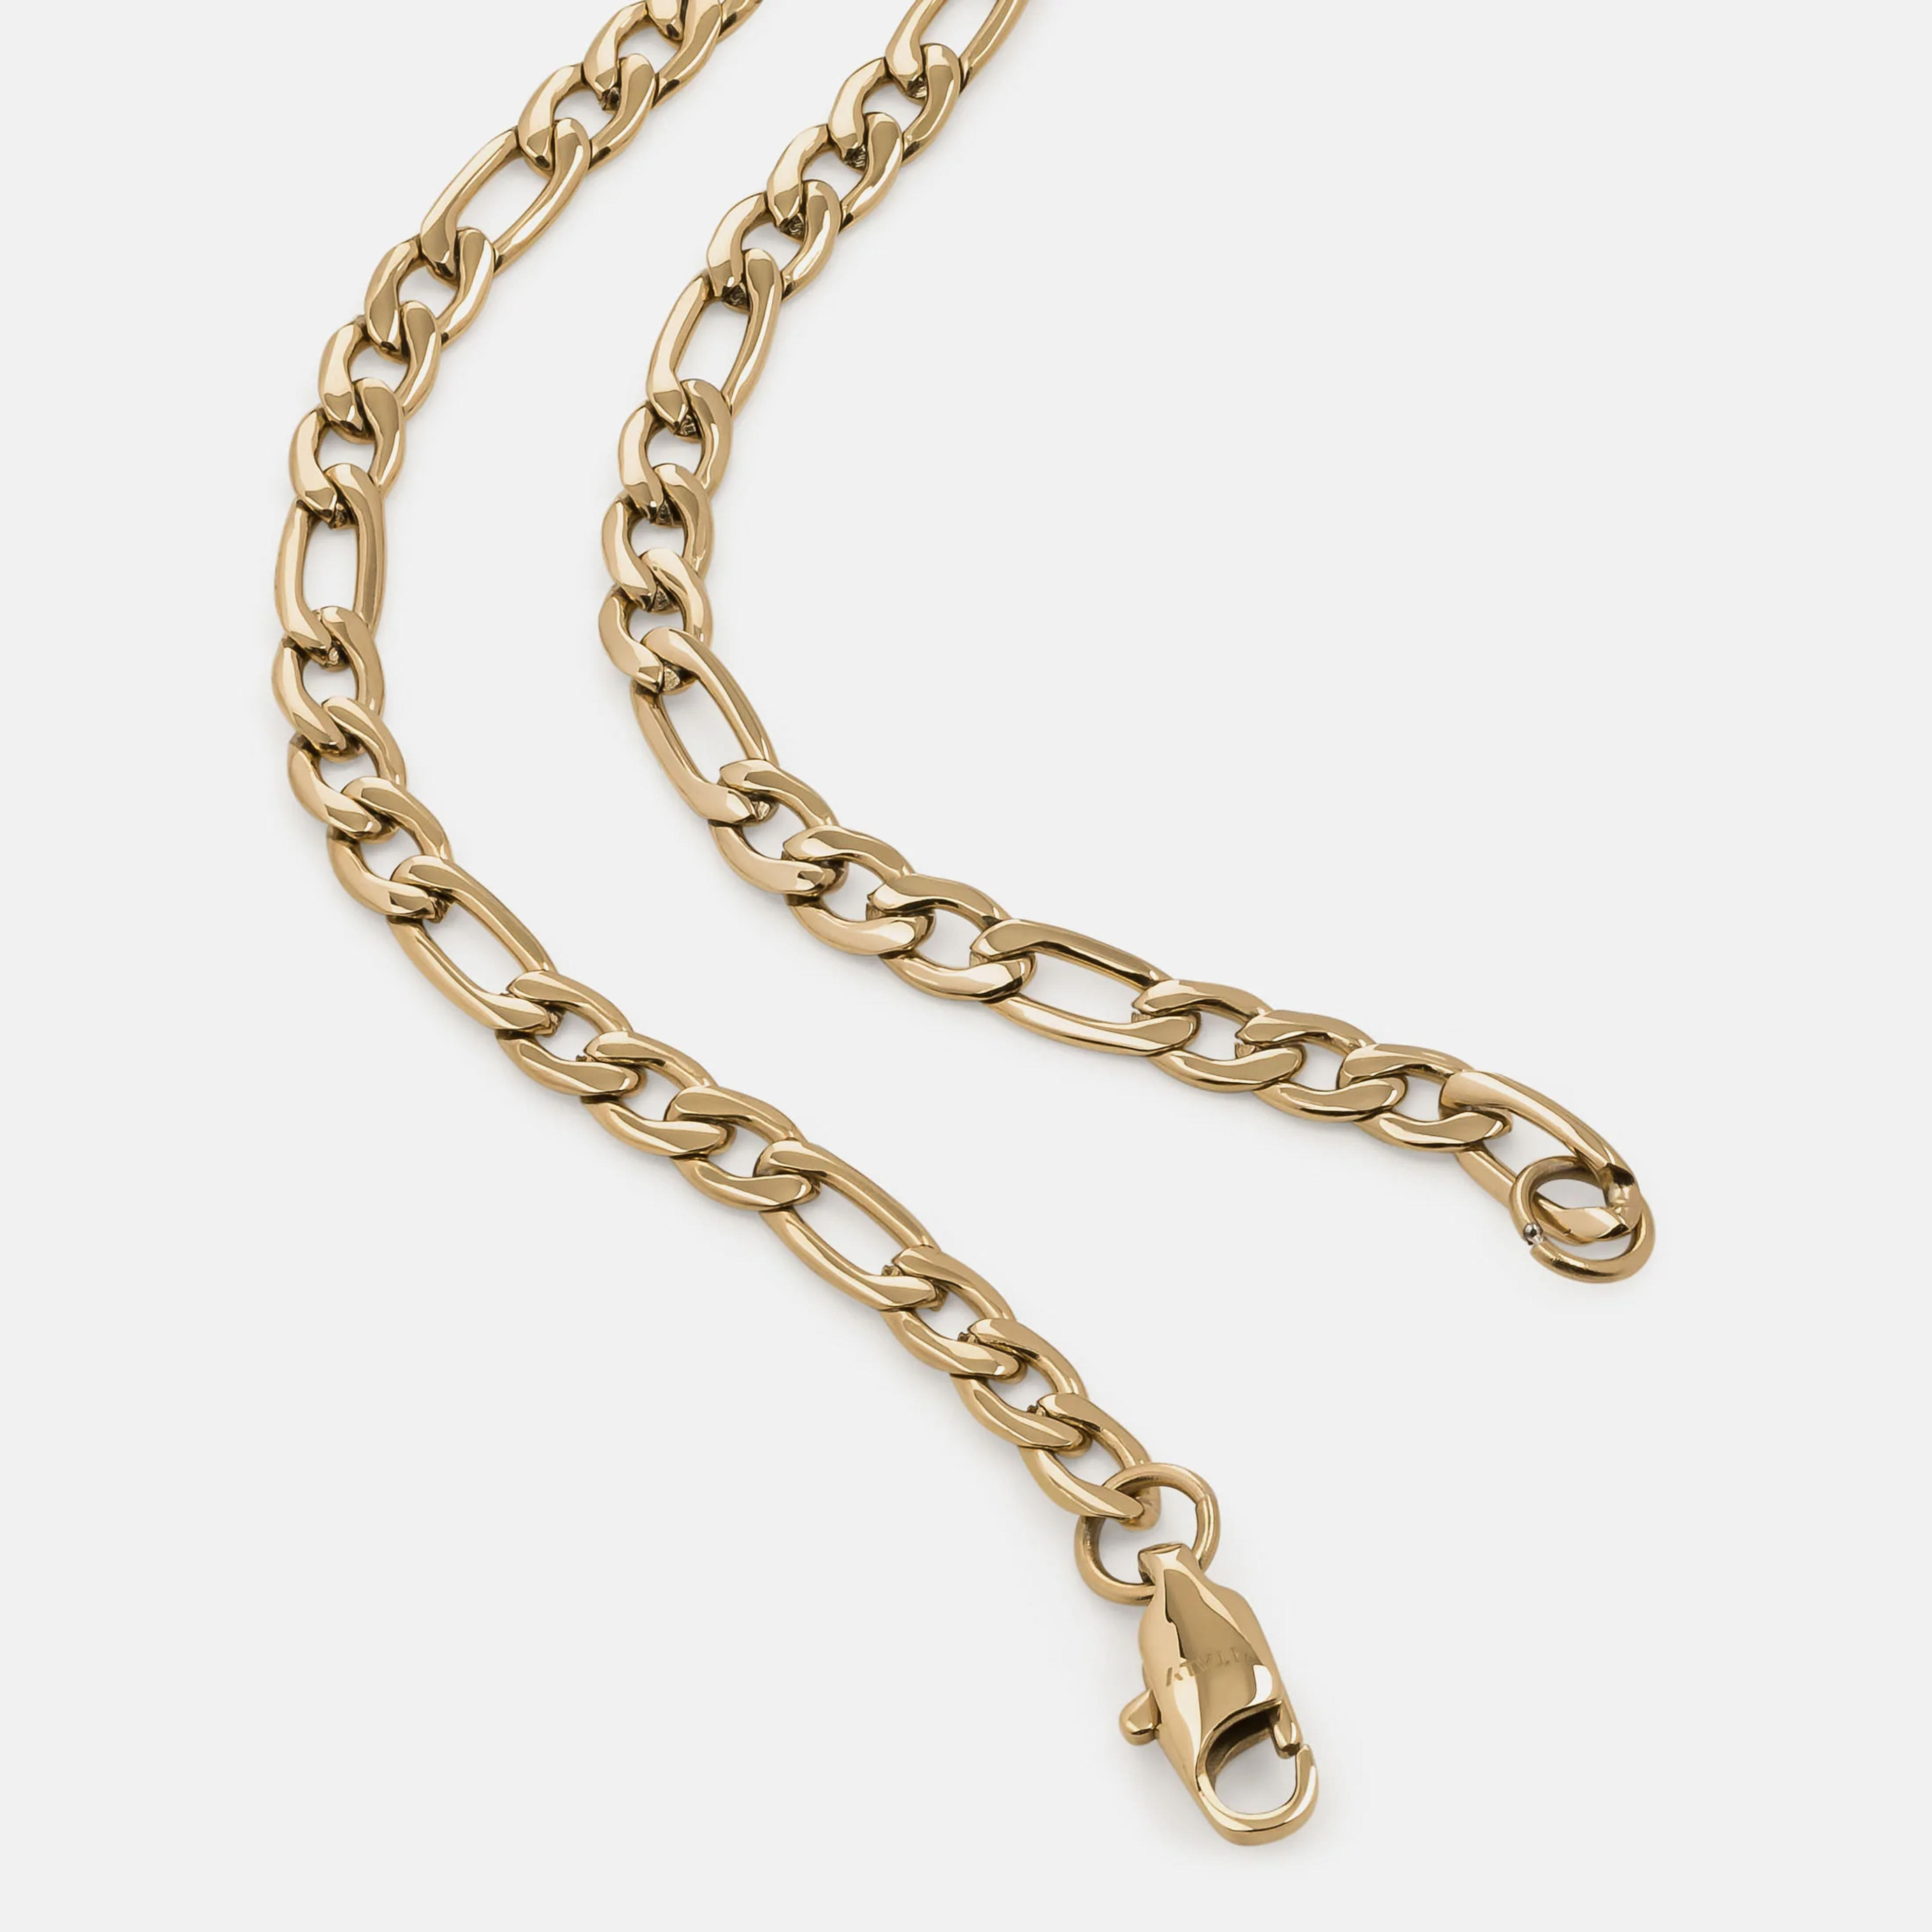 Vitaly Figaro Chain | 100% Recycled Stainless Steel Accessories